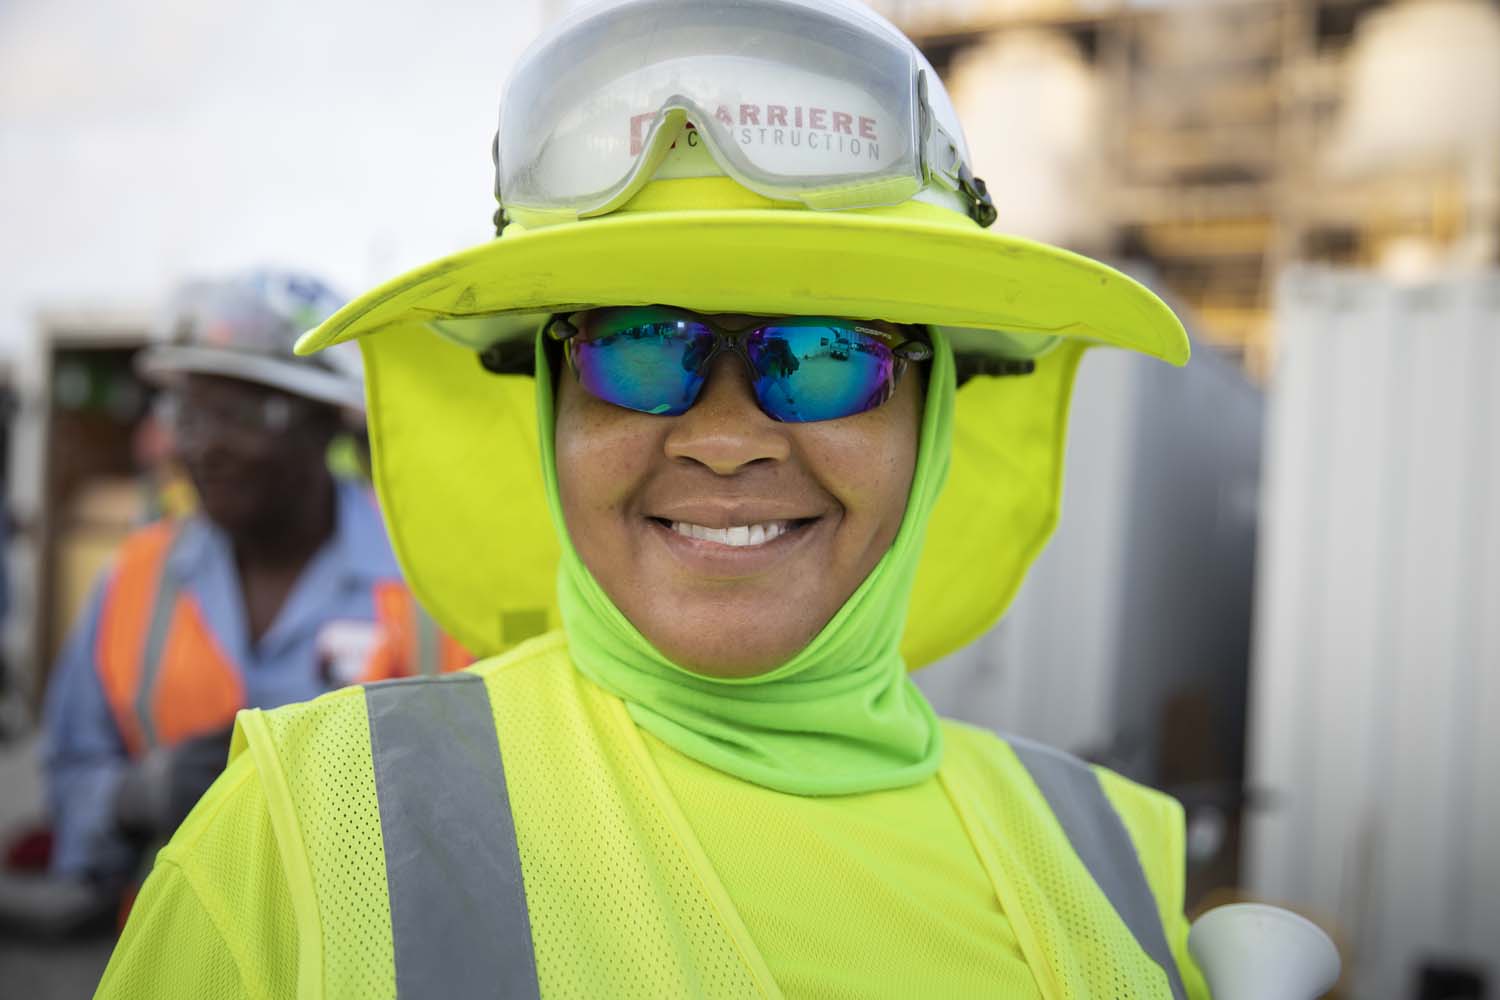 Barriere_Construction_Smiling_Worker